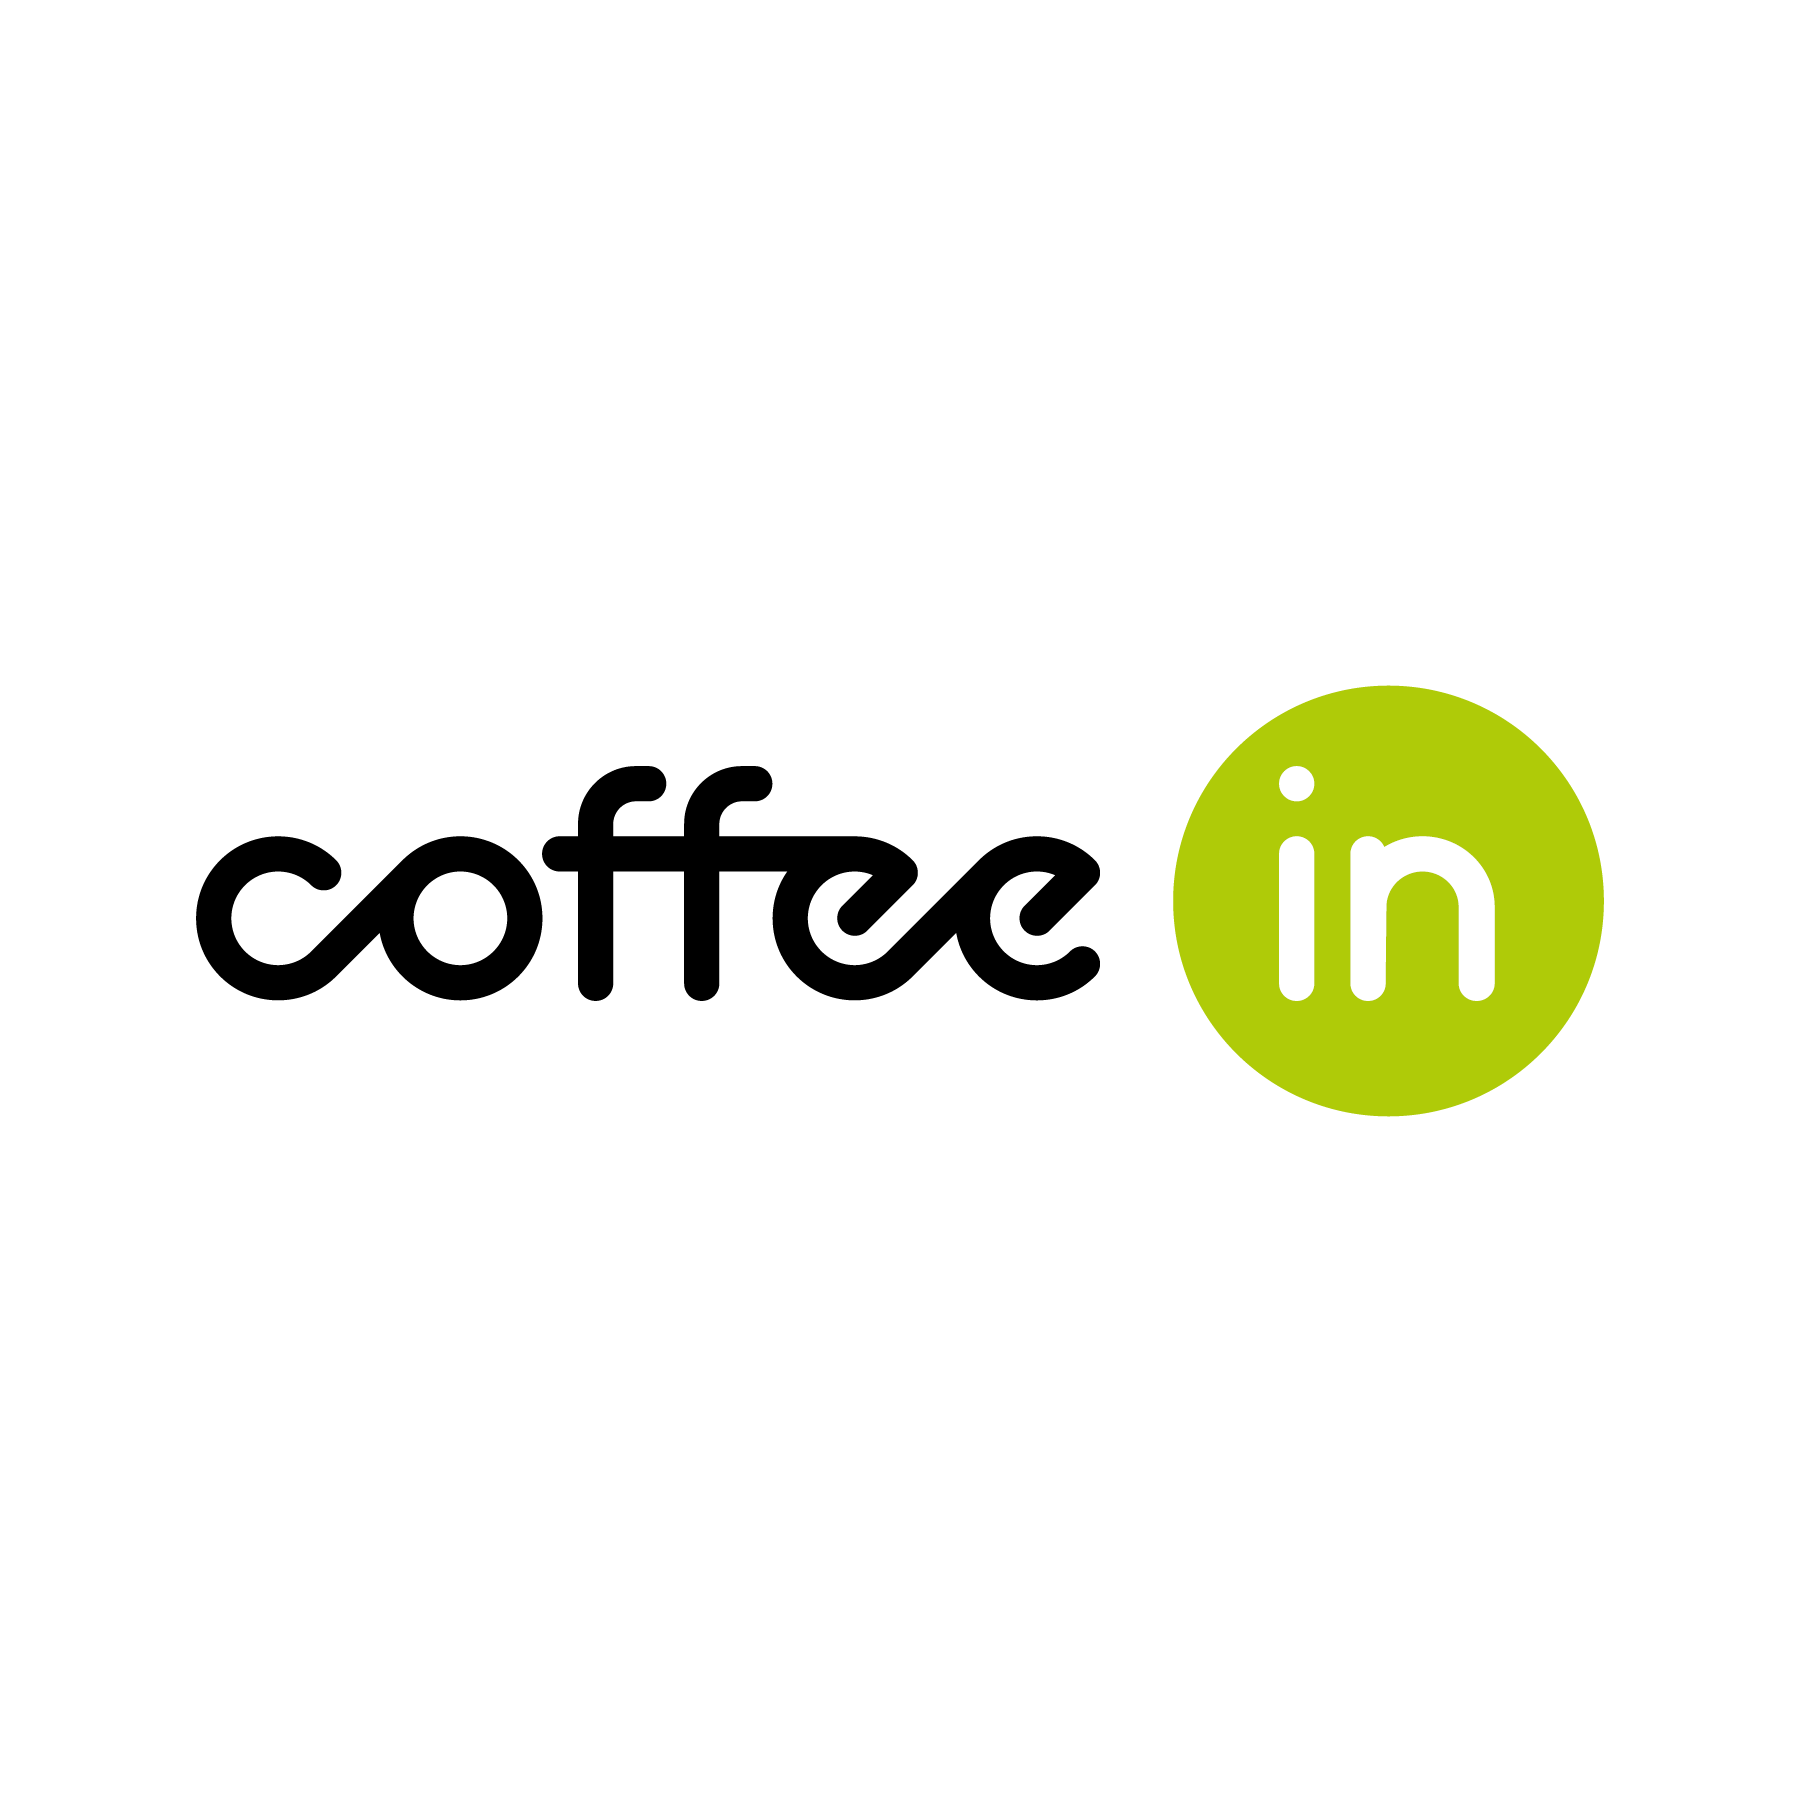 CoffeeIn logo design by logo designer OTLICHNOSTI for your inspiration and for the worlds largest logo competition